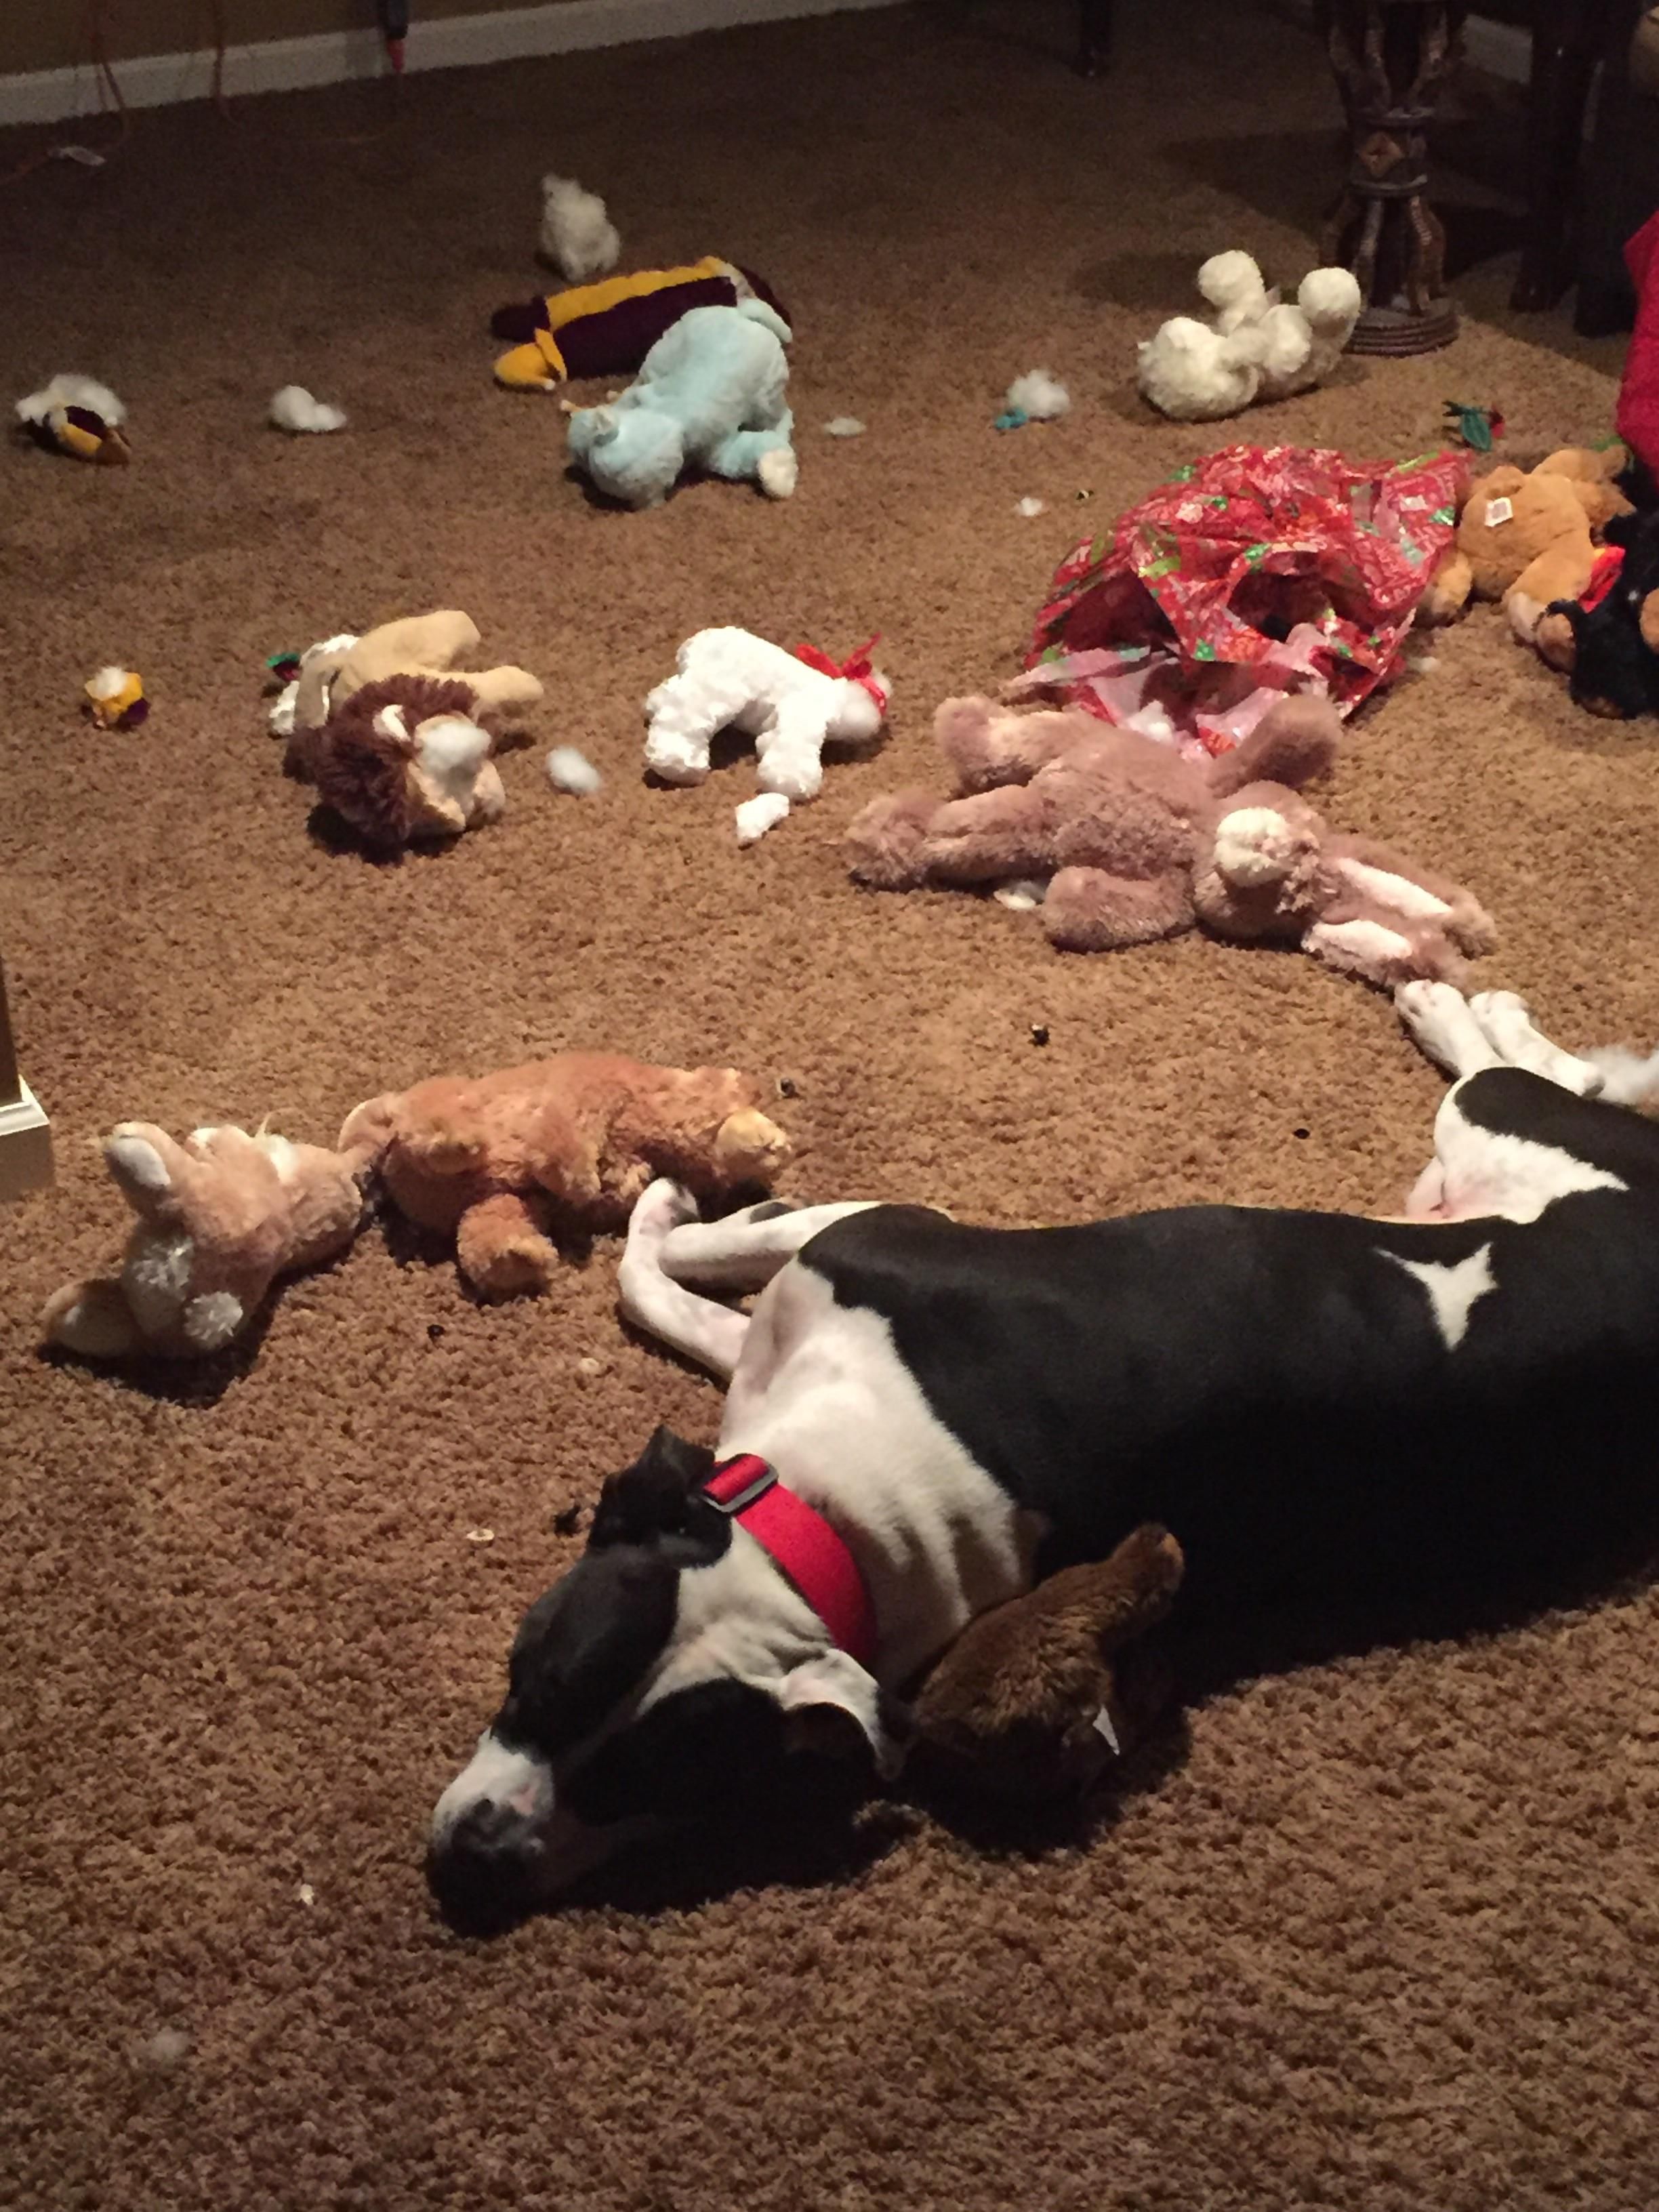 My dog OD’d on stuffed animals and passed out.